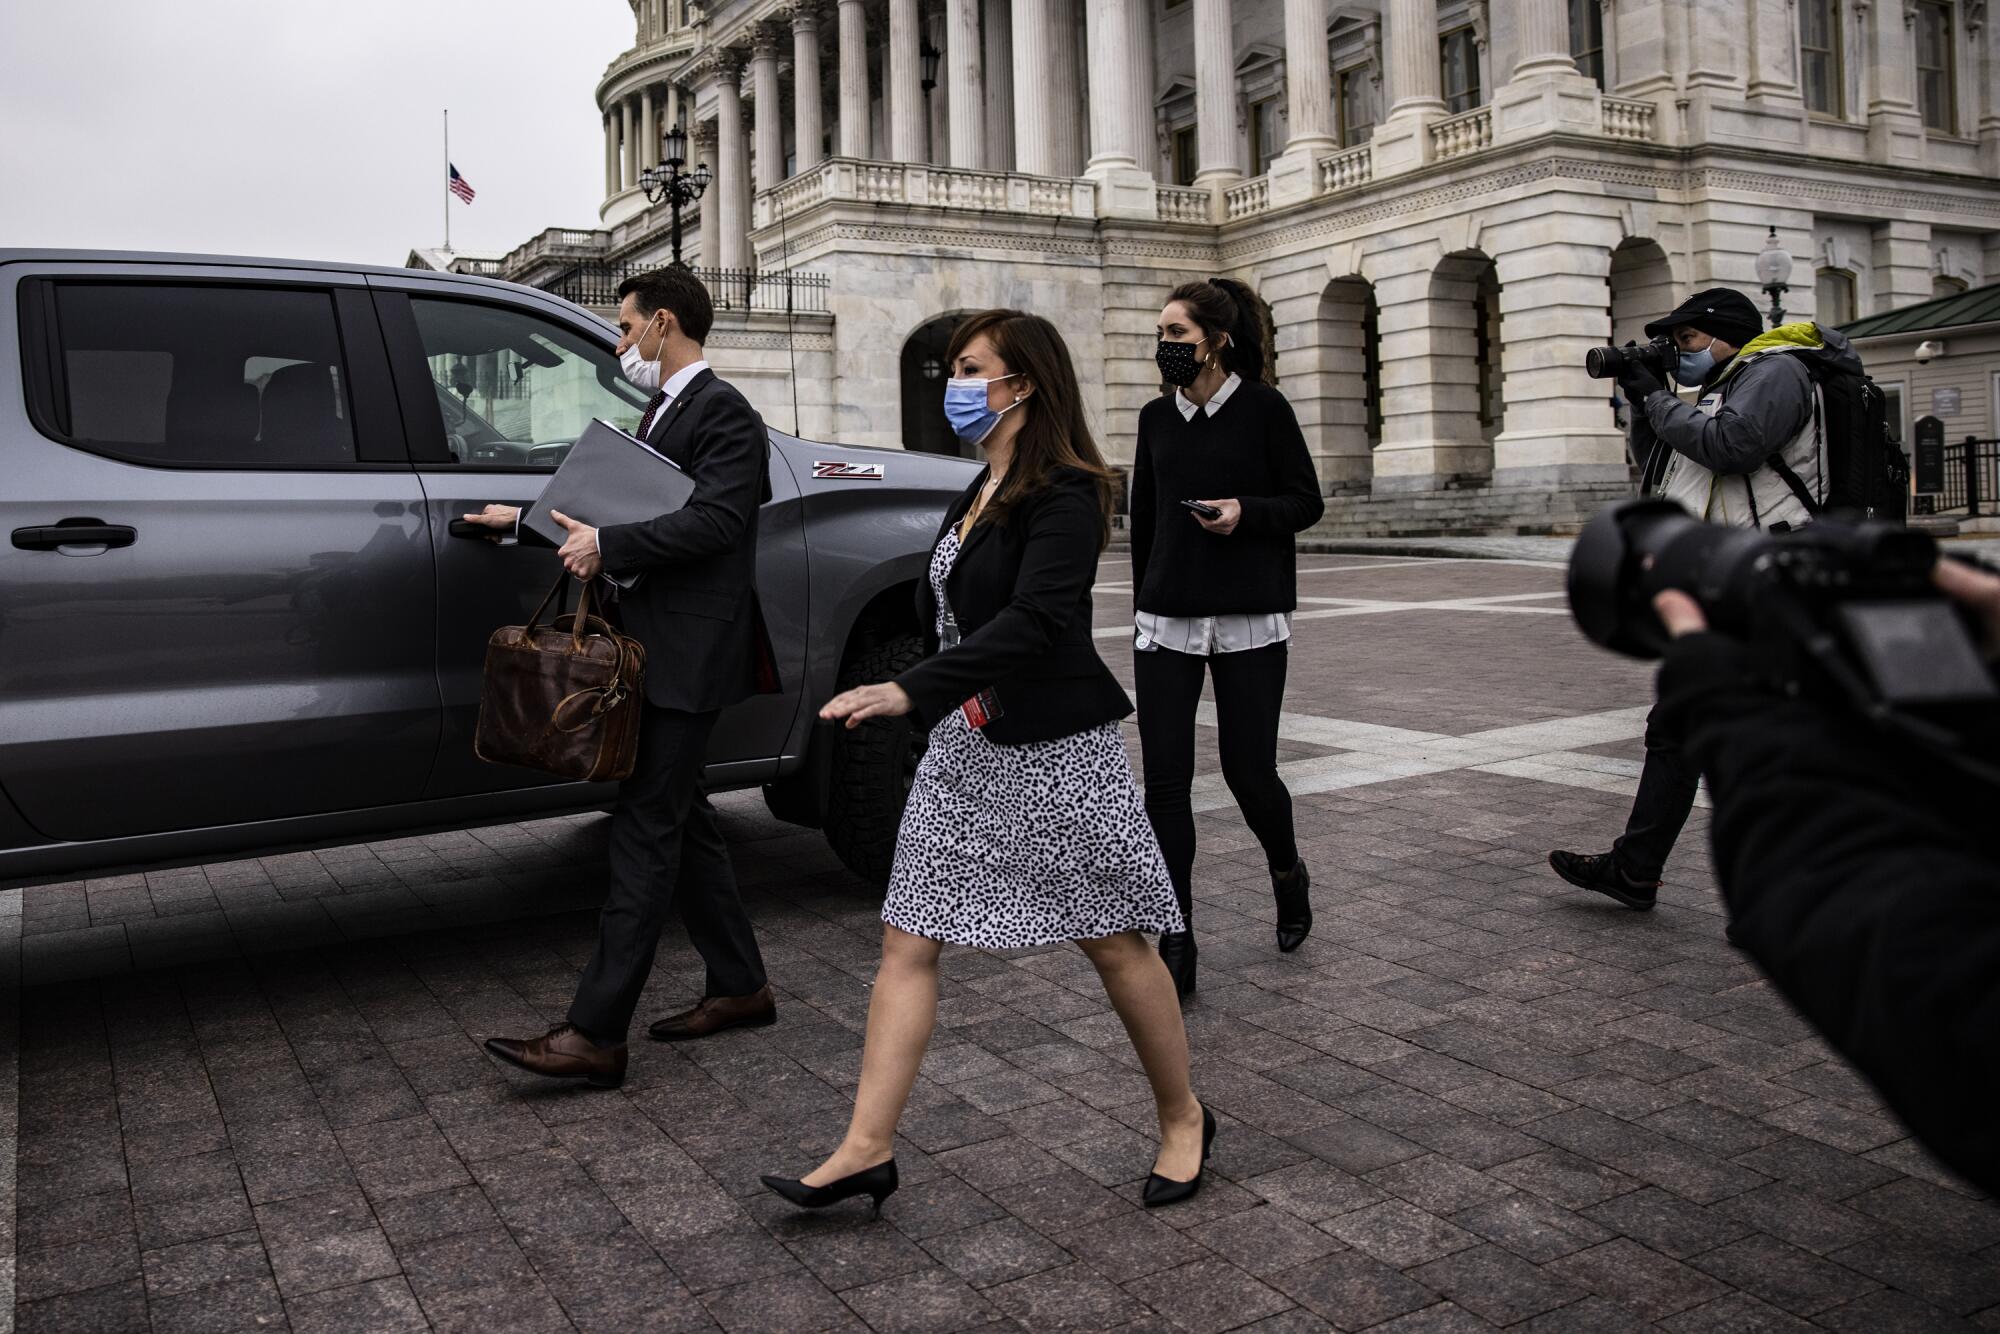 A senator opens the door to an SUV outside the Capitol